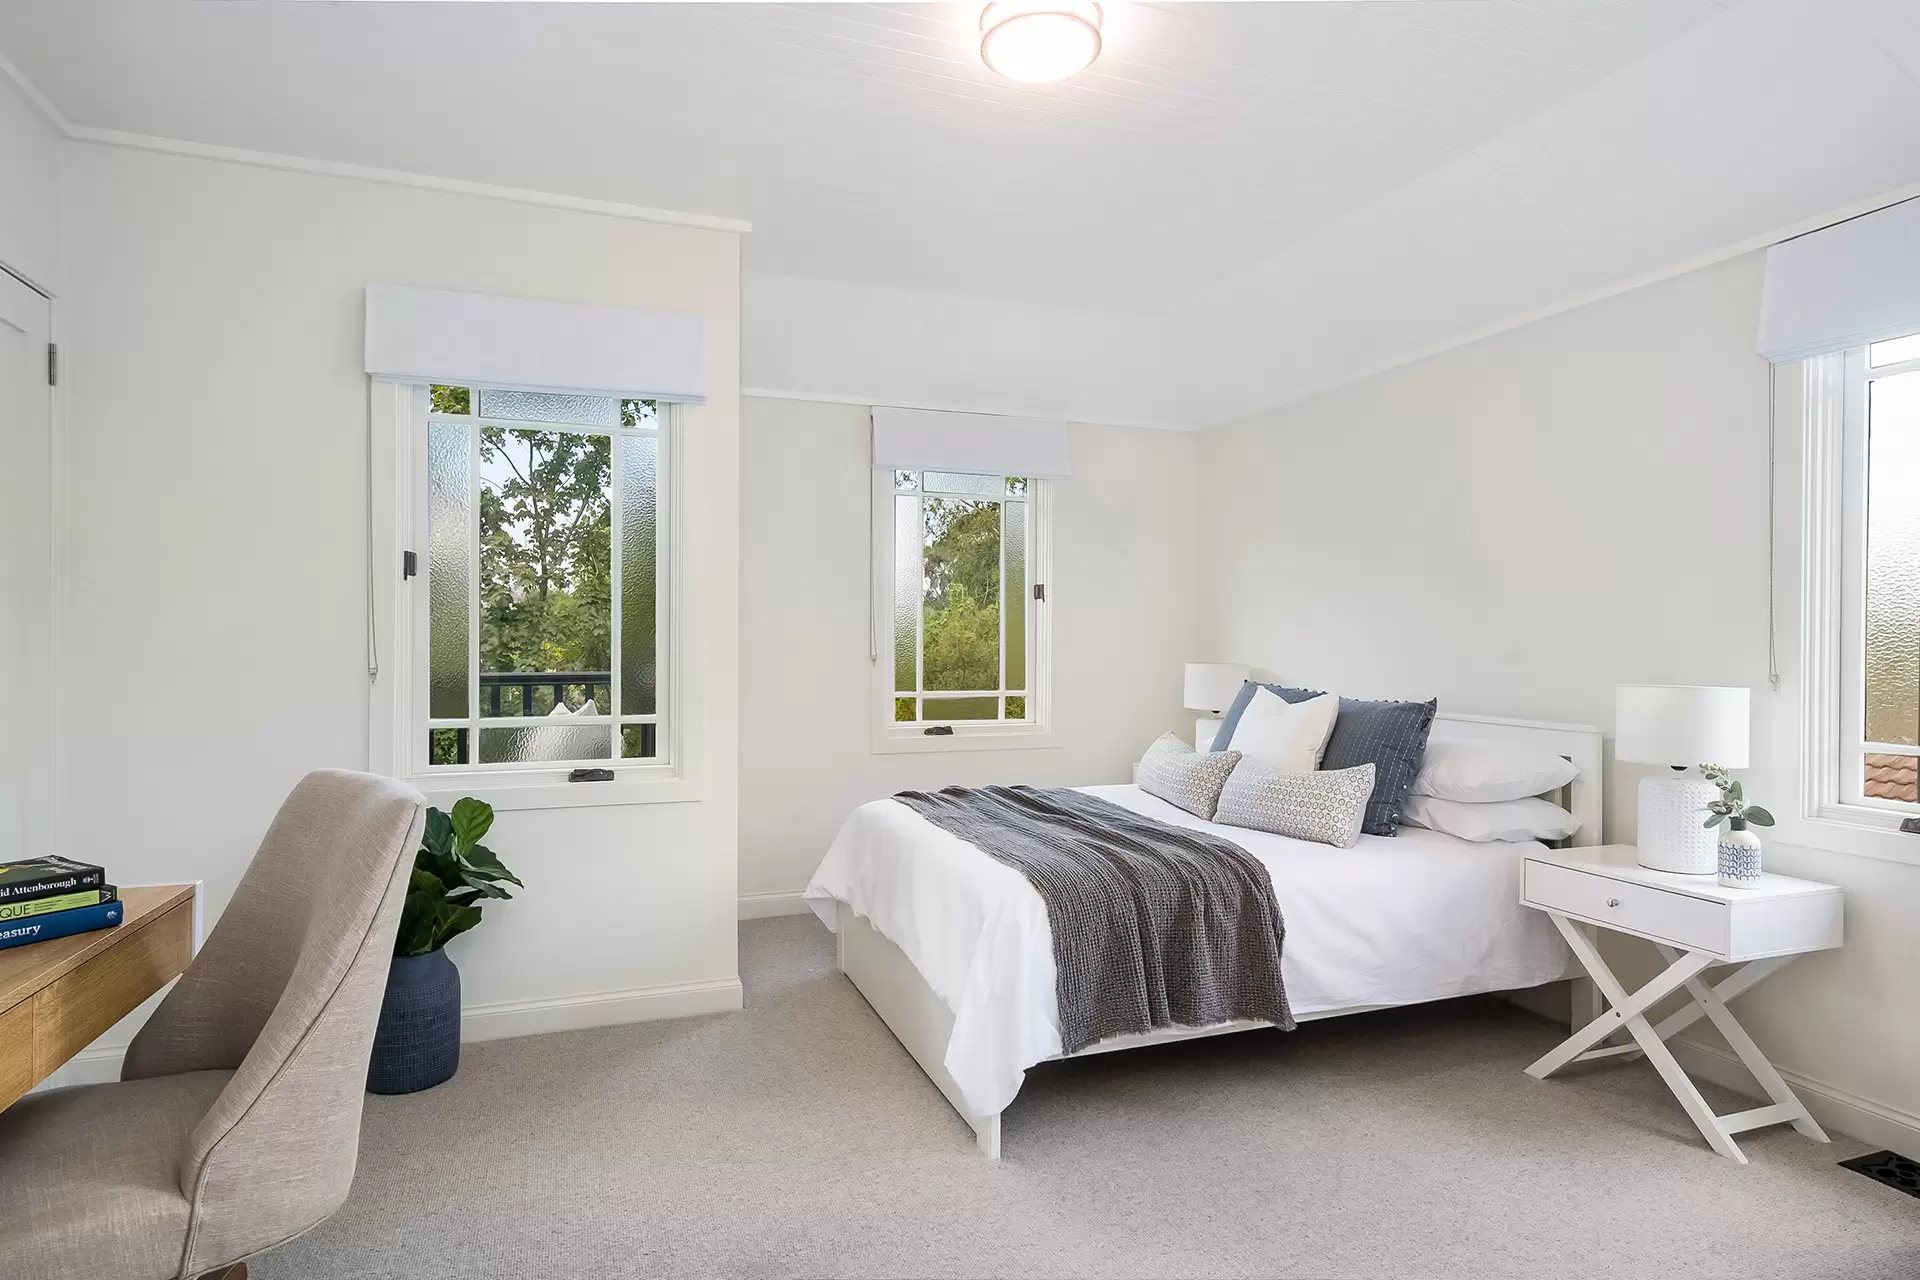 Photo #13: 11 Plane Tree Close, Bowral - Sold by Drew Lindsay Sotheby's International Realty